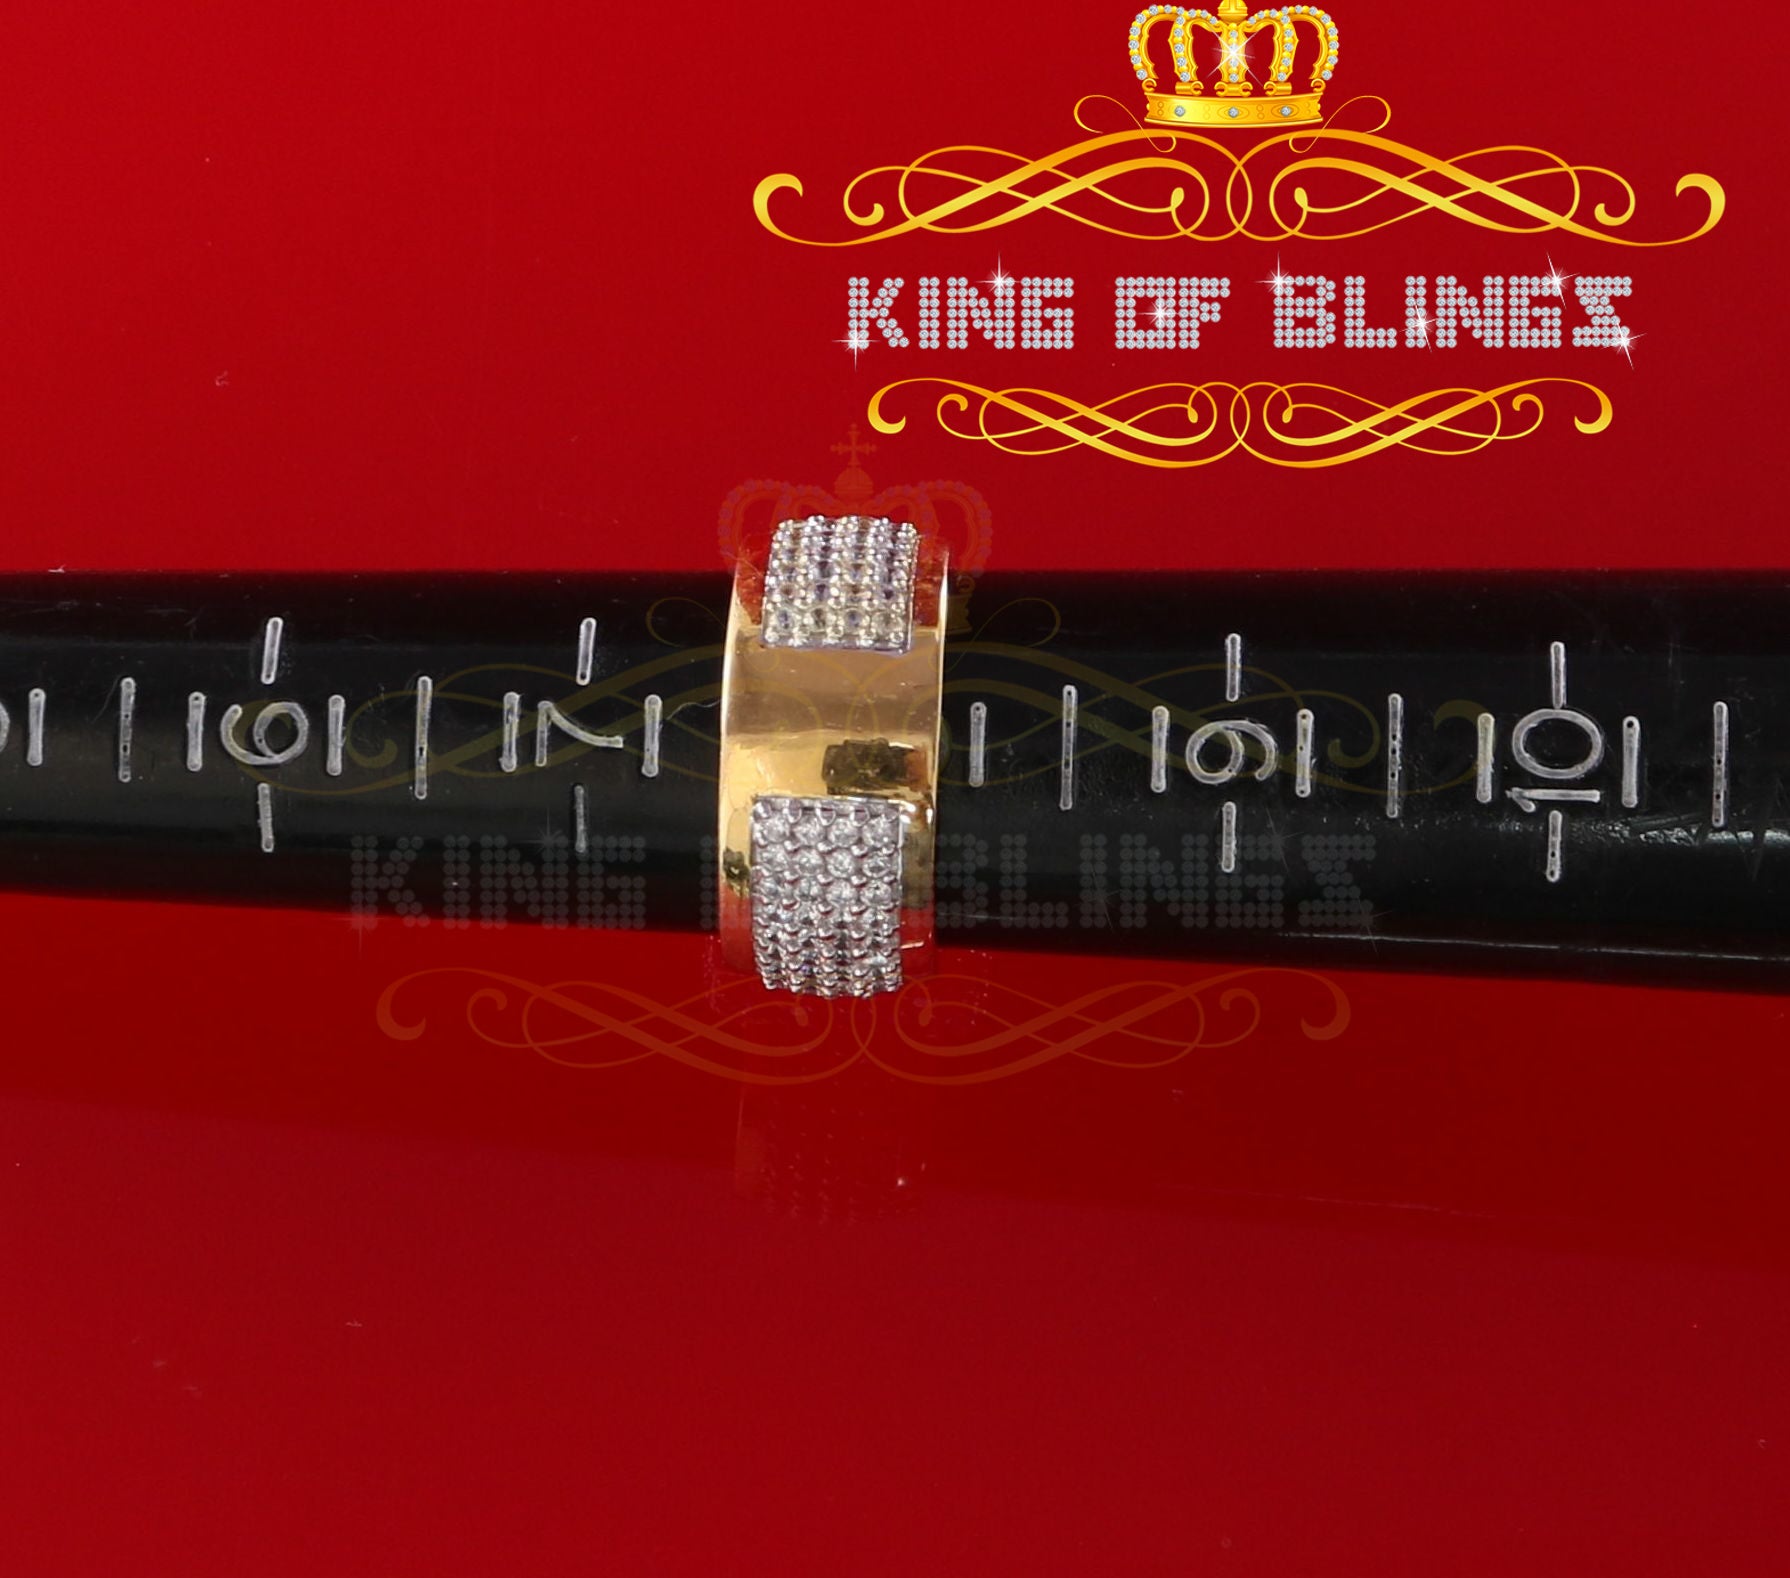 King Of Bling's 925 Silver Yellow 8.50ct Cubic Zirconia Wide Square Fancy Unisex Ring Size 8 KING OF BLINGS